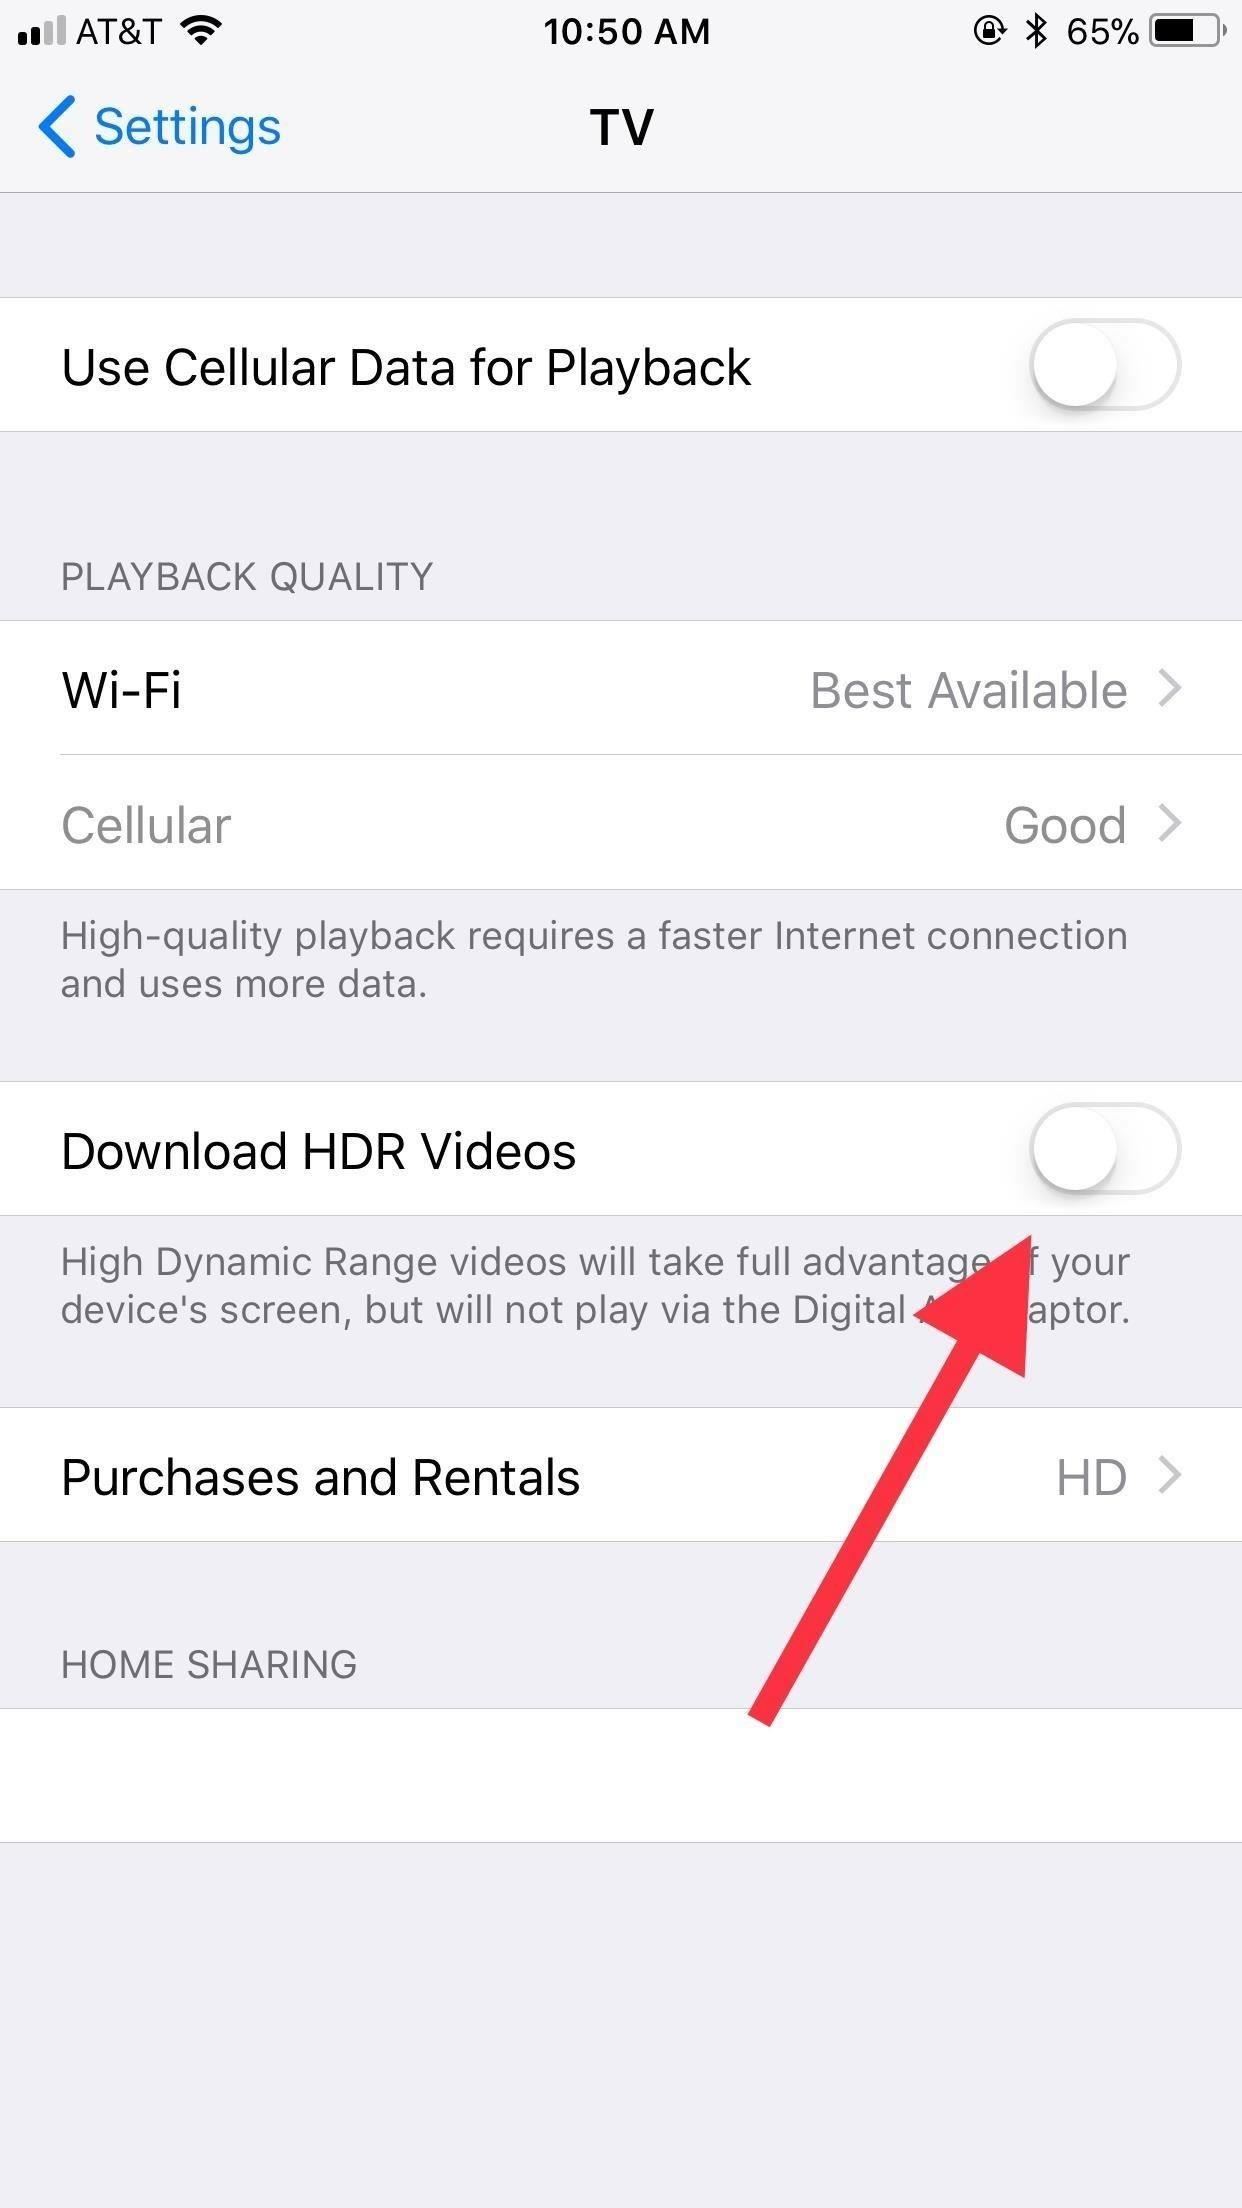 How to Disable HDR Video Downloads on Your iPhone 8 or 8 Plus